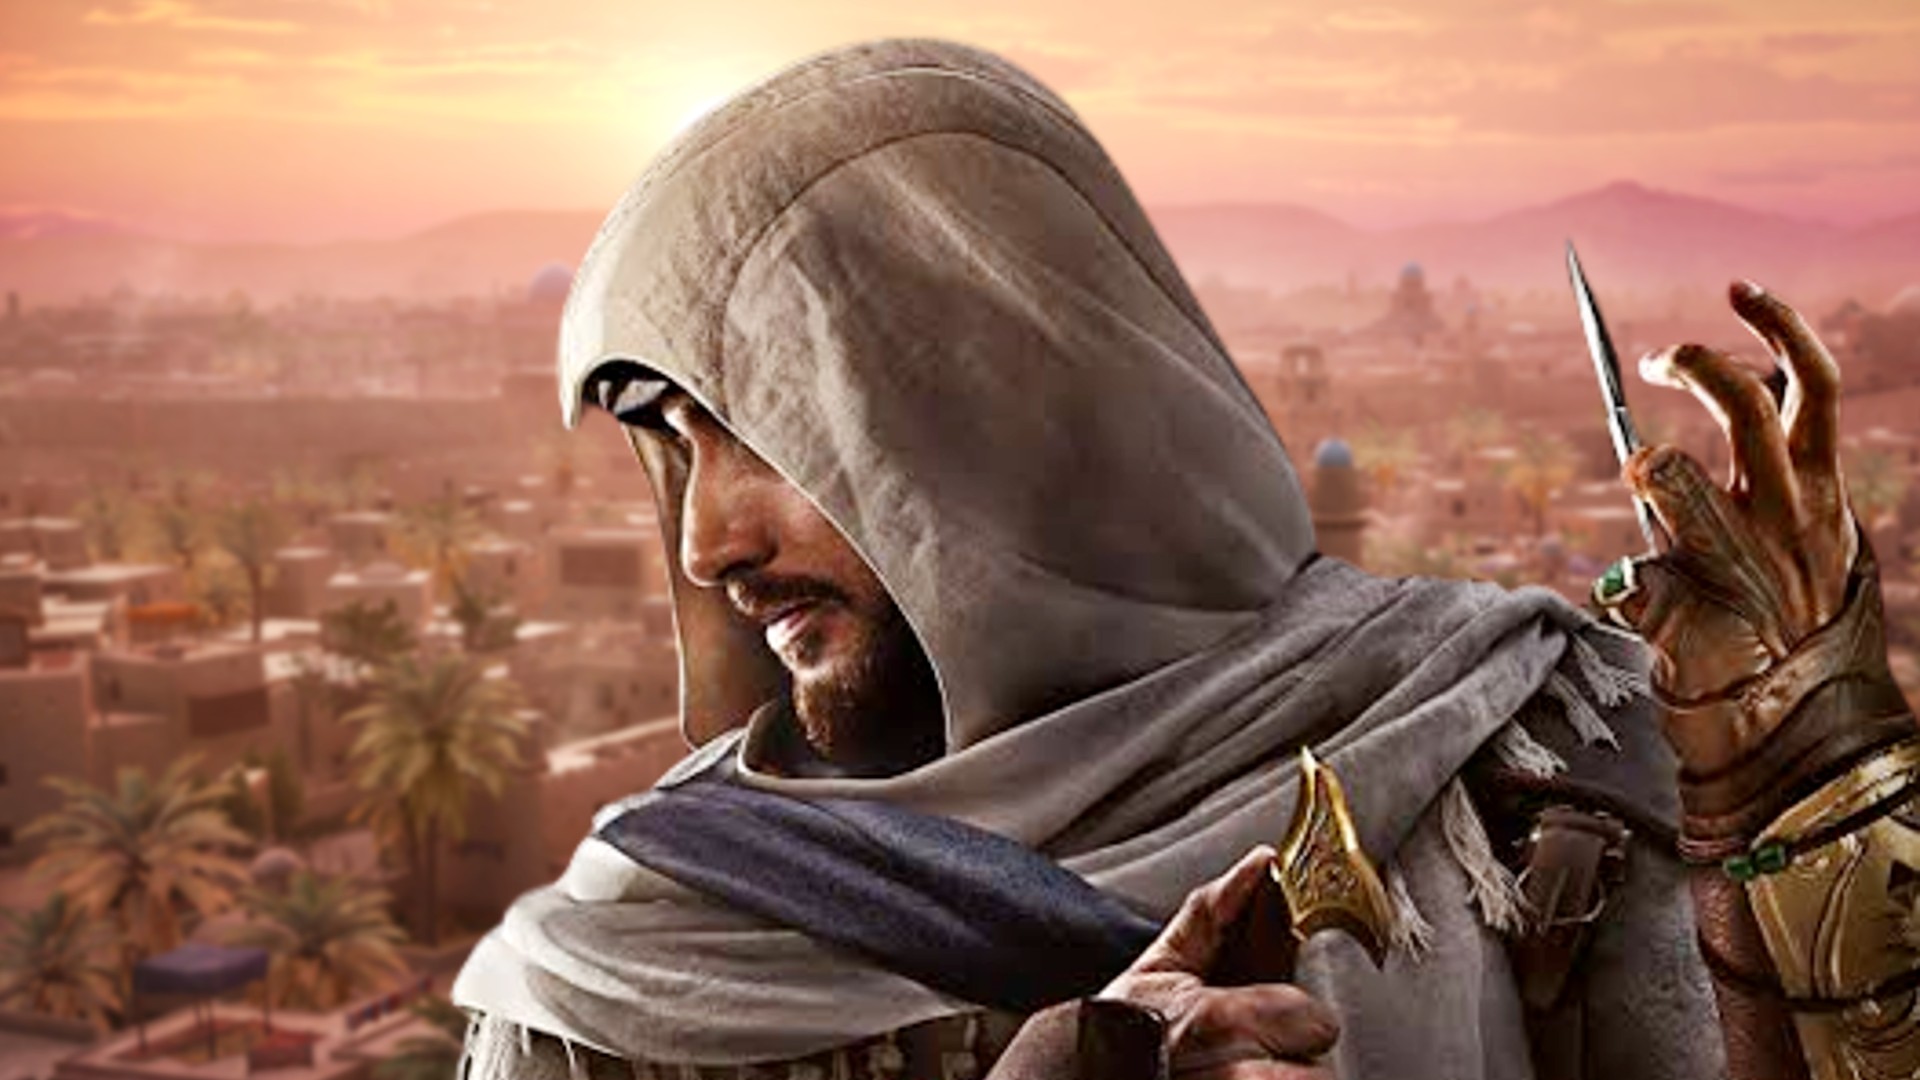 When Does Assassin's Creed Valhalla Take Place? Assassin's Creed